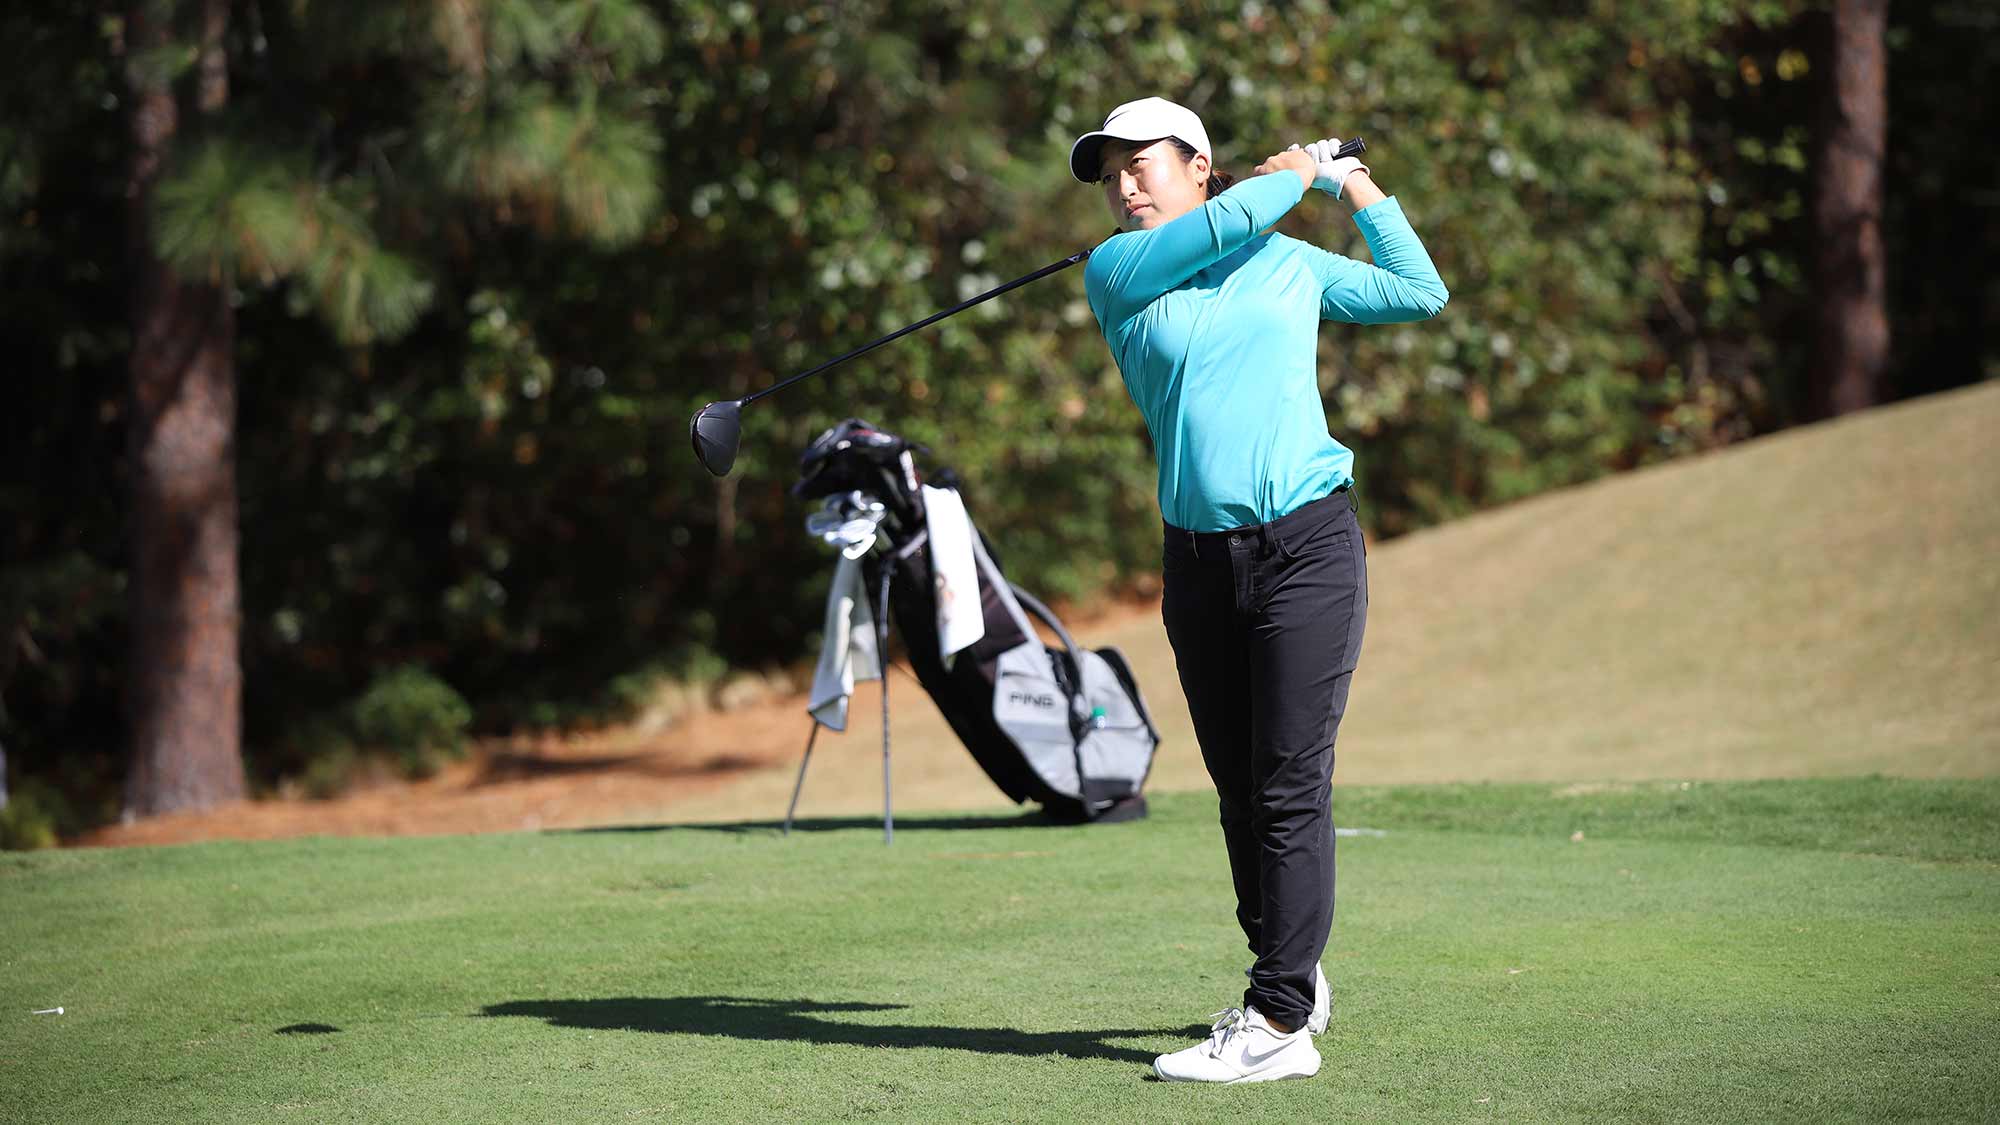 Kyung Kim hits a shot during Tuesday's practice round ahead of the start of the 2019 LPGA Q-Series at Pinehurst Resort